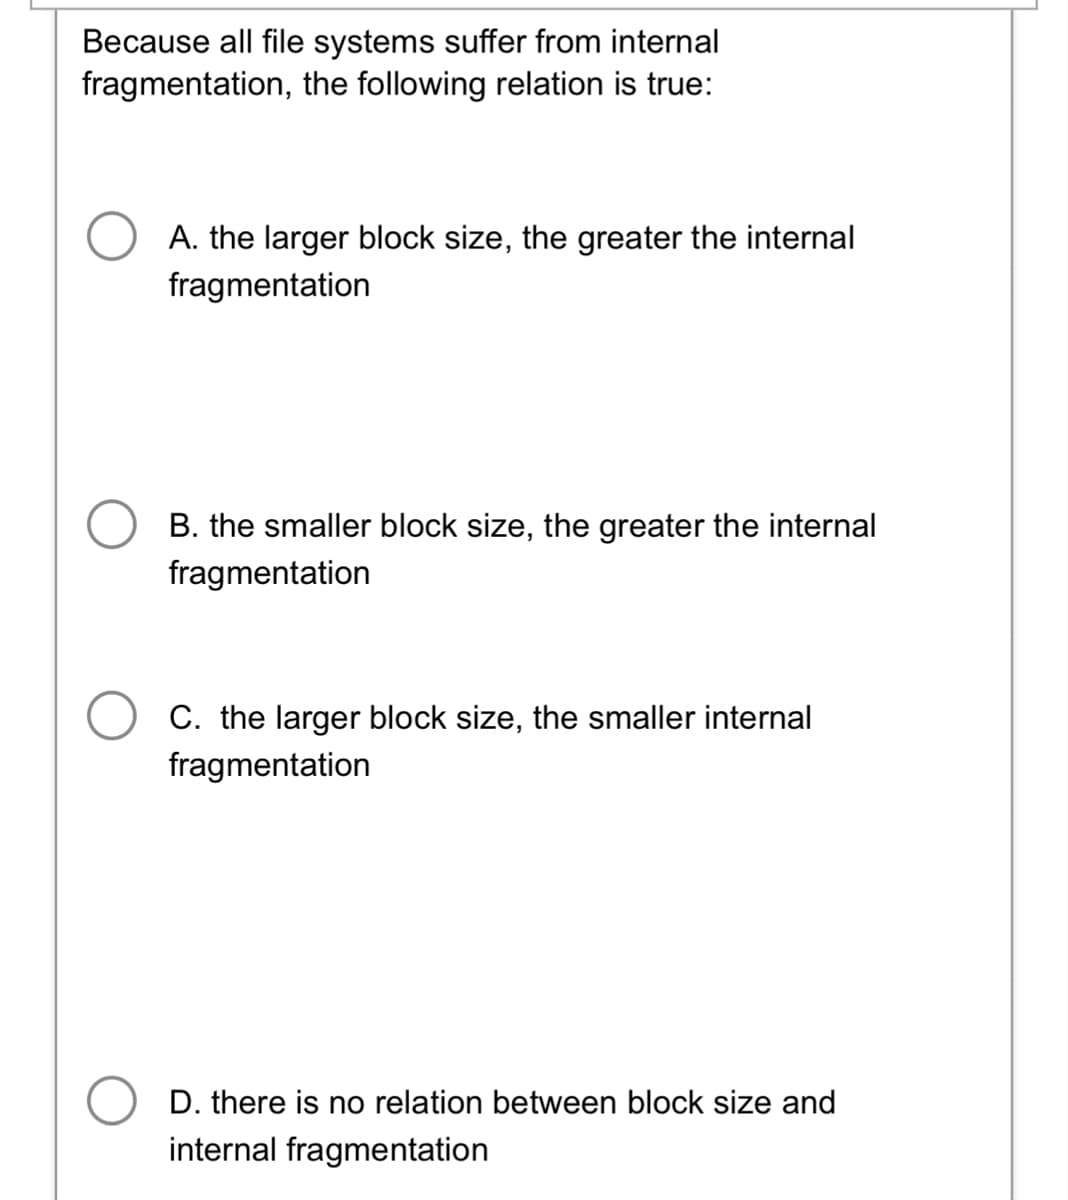 Because all file systems suffer from internal
fragmentation, the following relation is true:
A. the larger block size, the greater the internal
fragmentation
B. the smaller block size, the greater the internal
fragmentation
C. the larger block size, the smaller internal
fragmentation
D. there is no relation between block size and
internal fragmentation